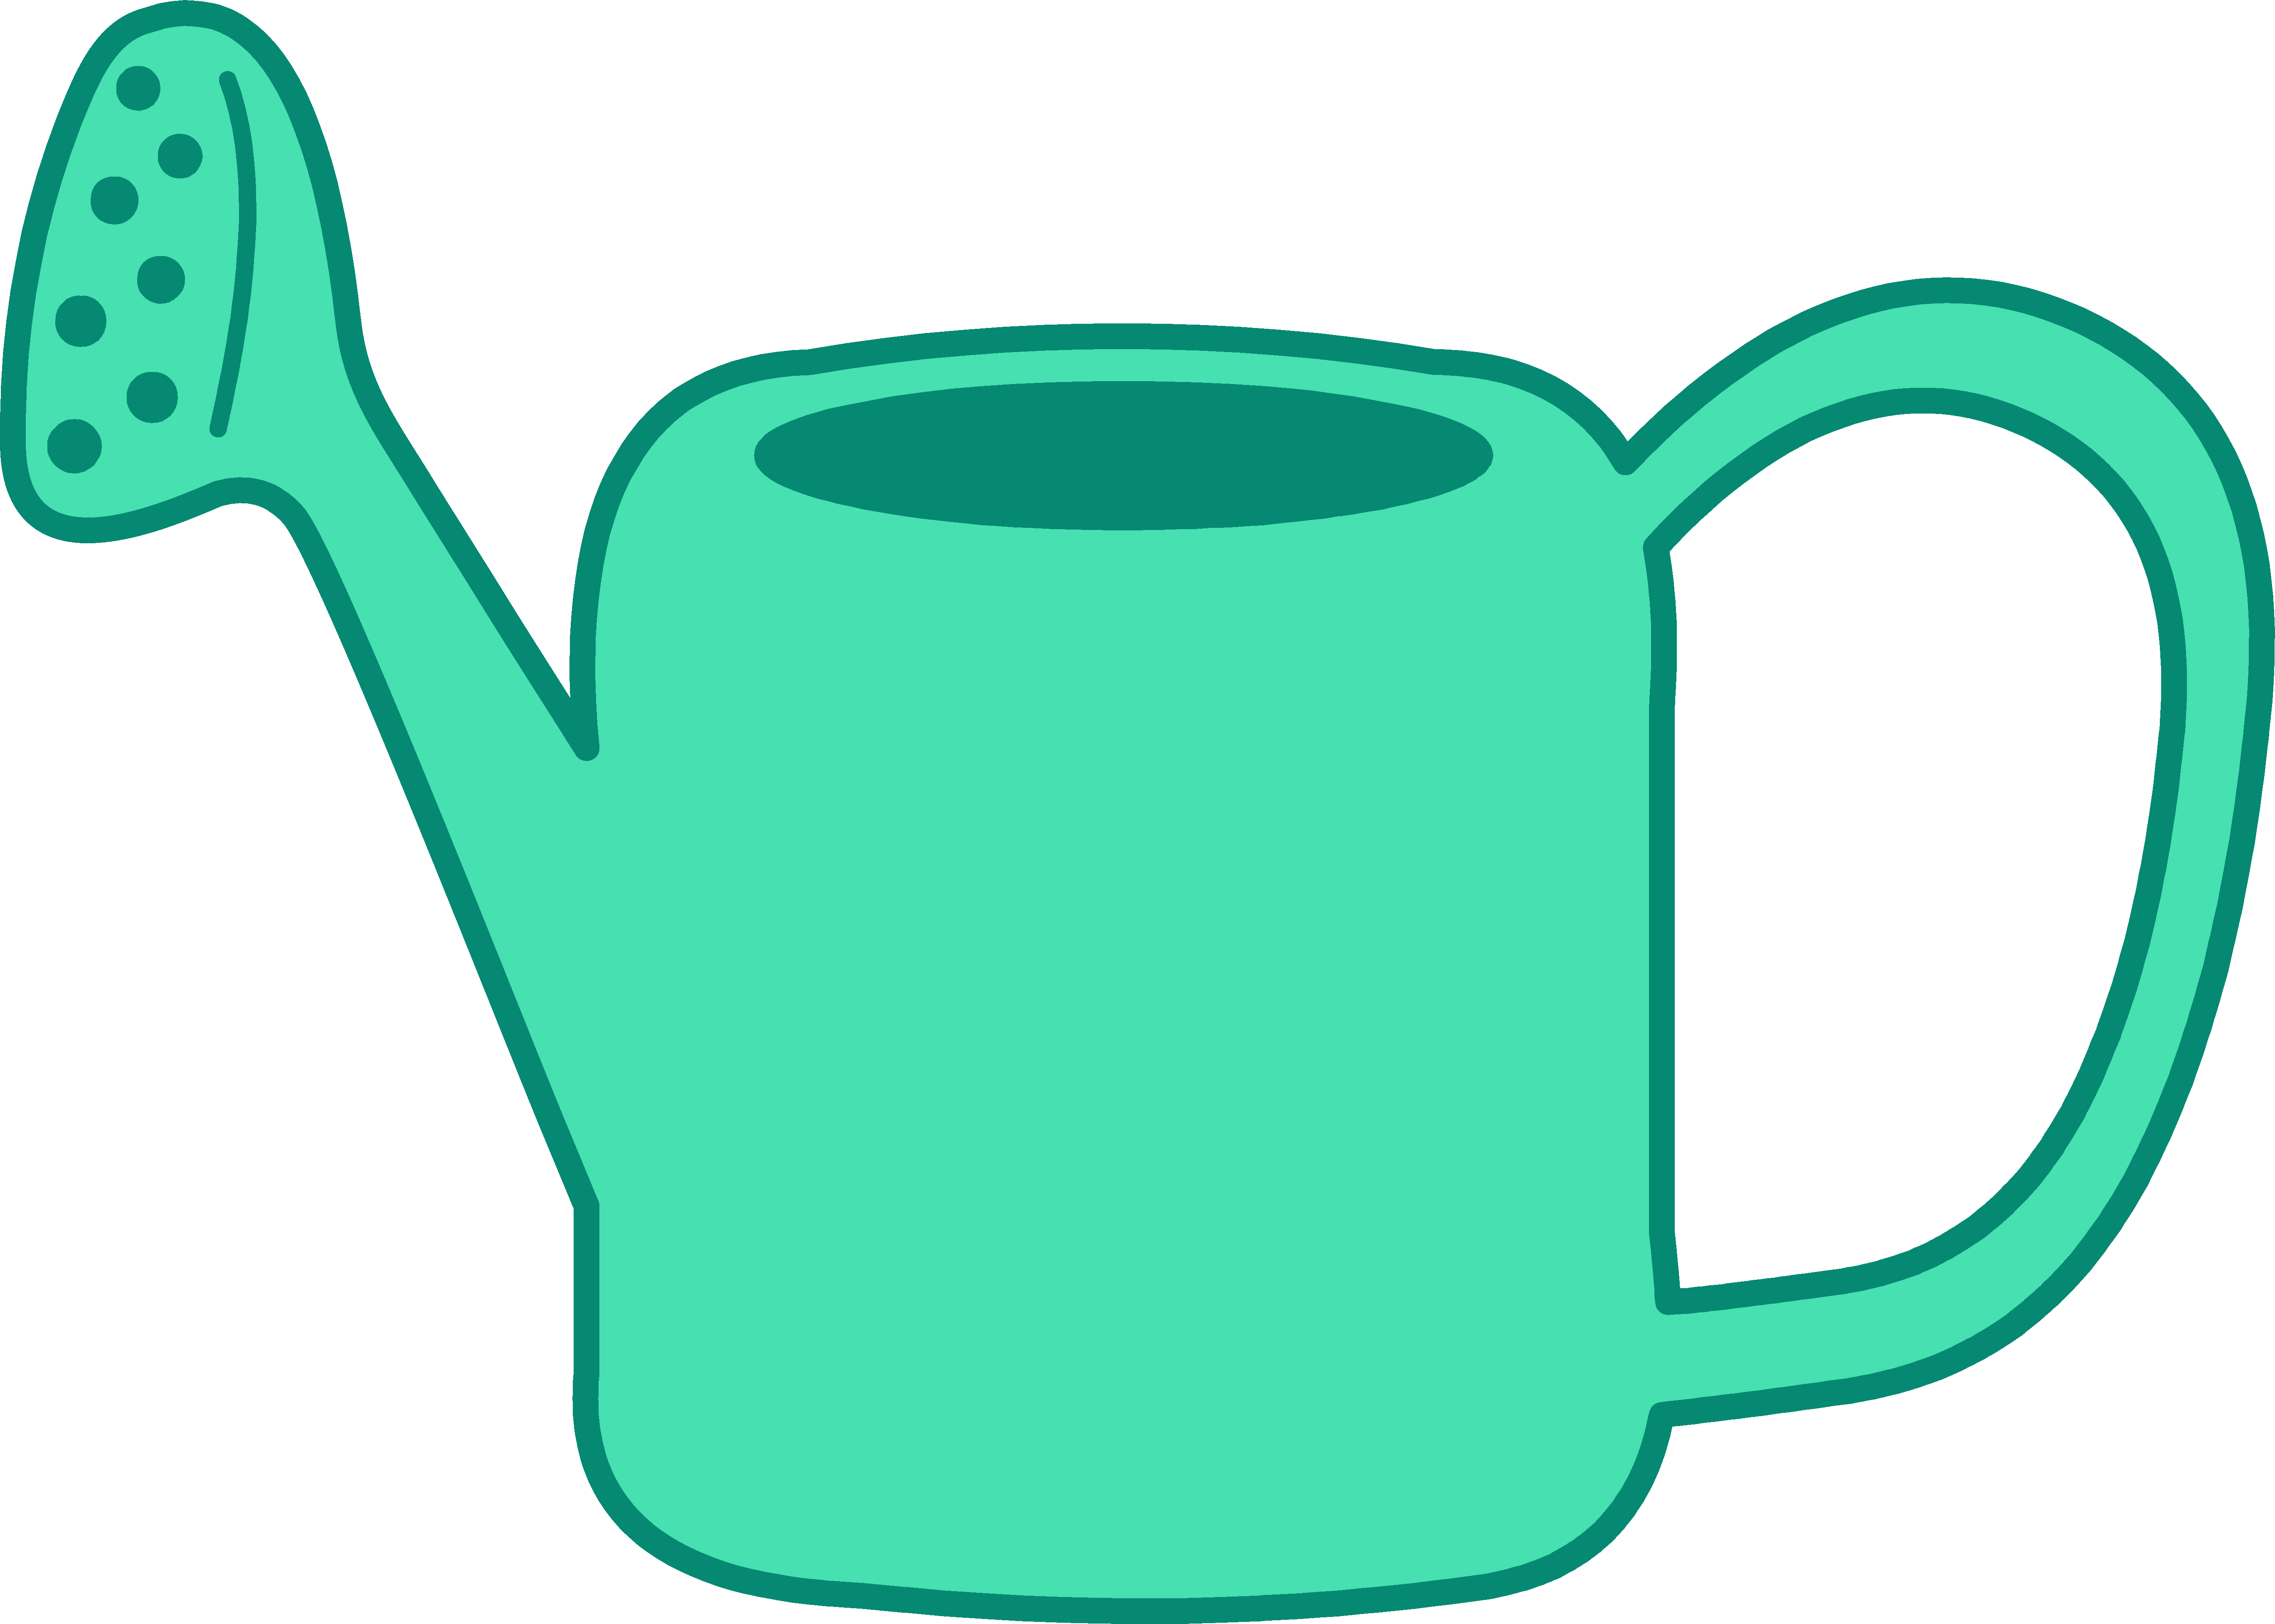 Watering can clip art free clipart images 2